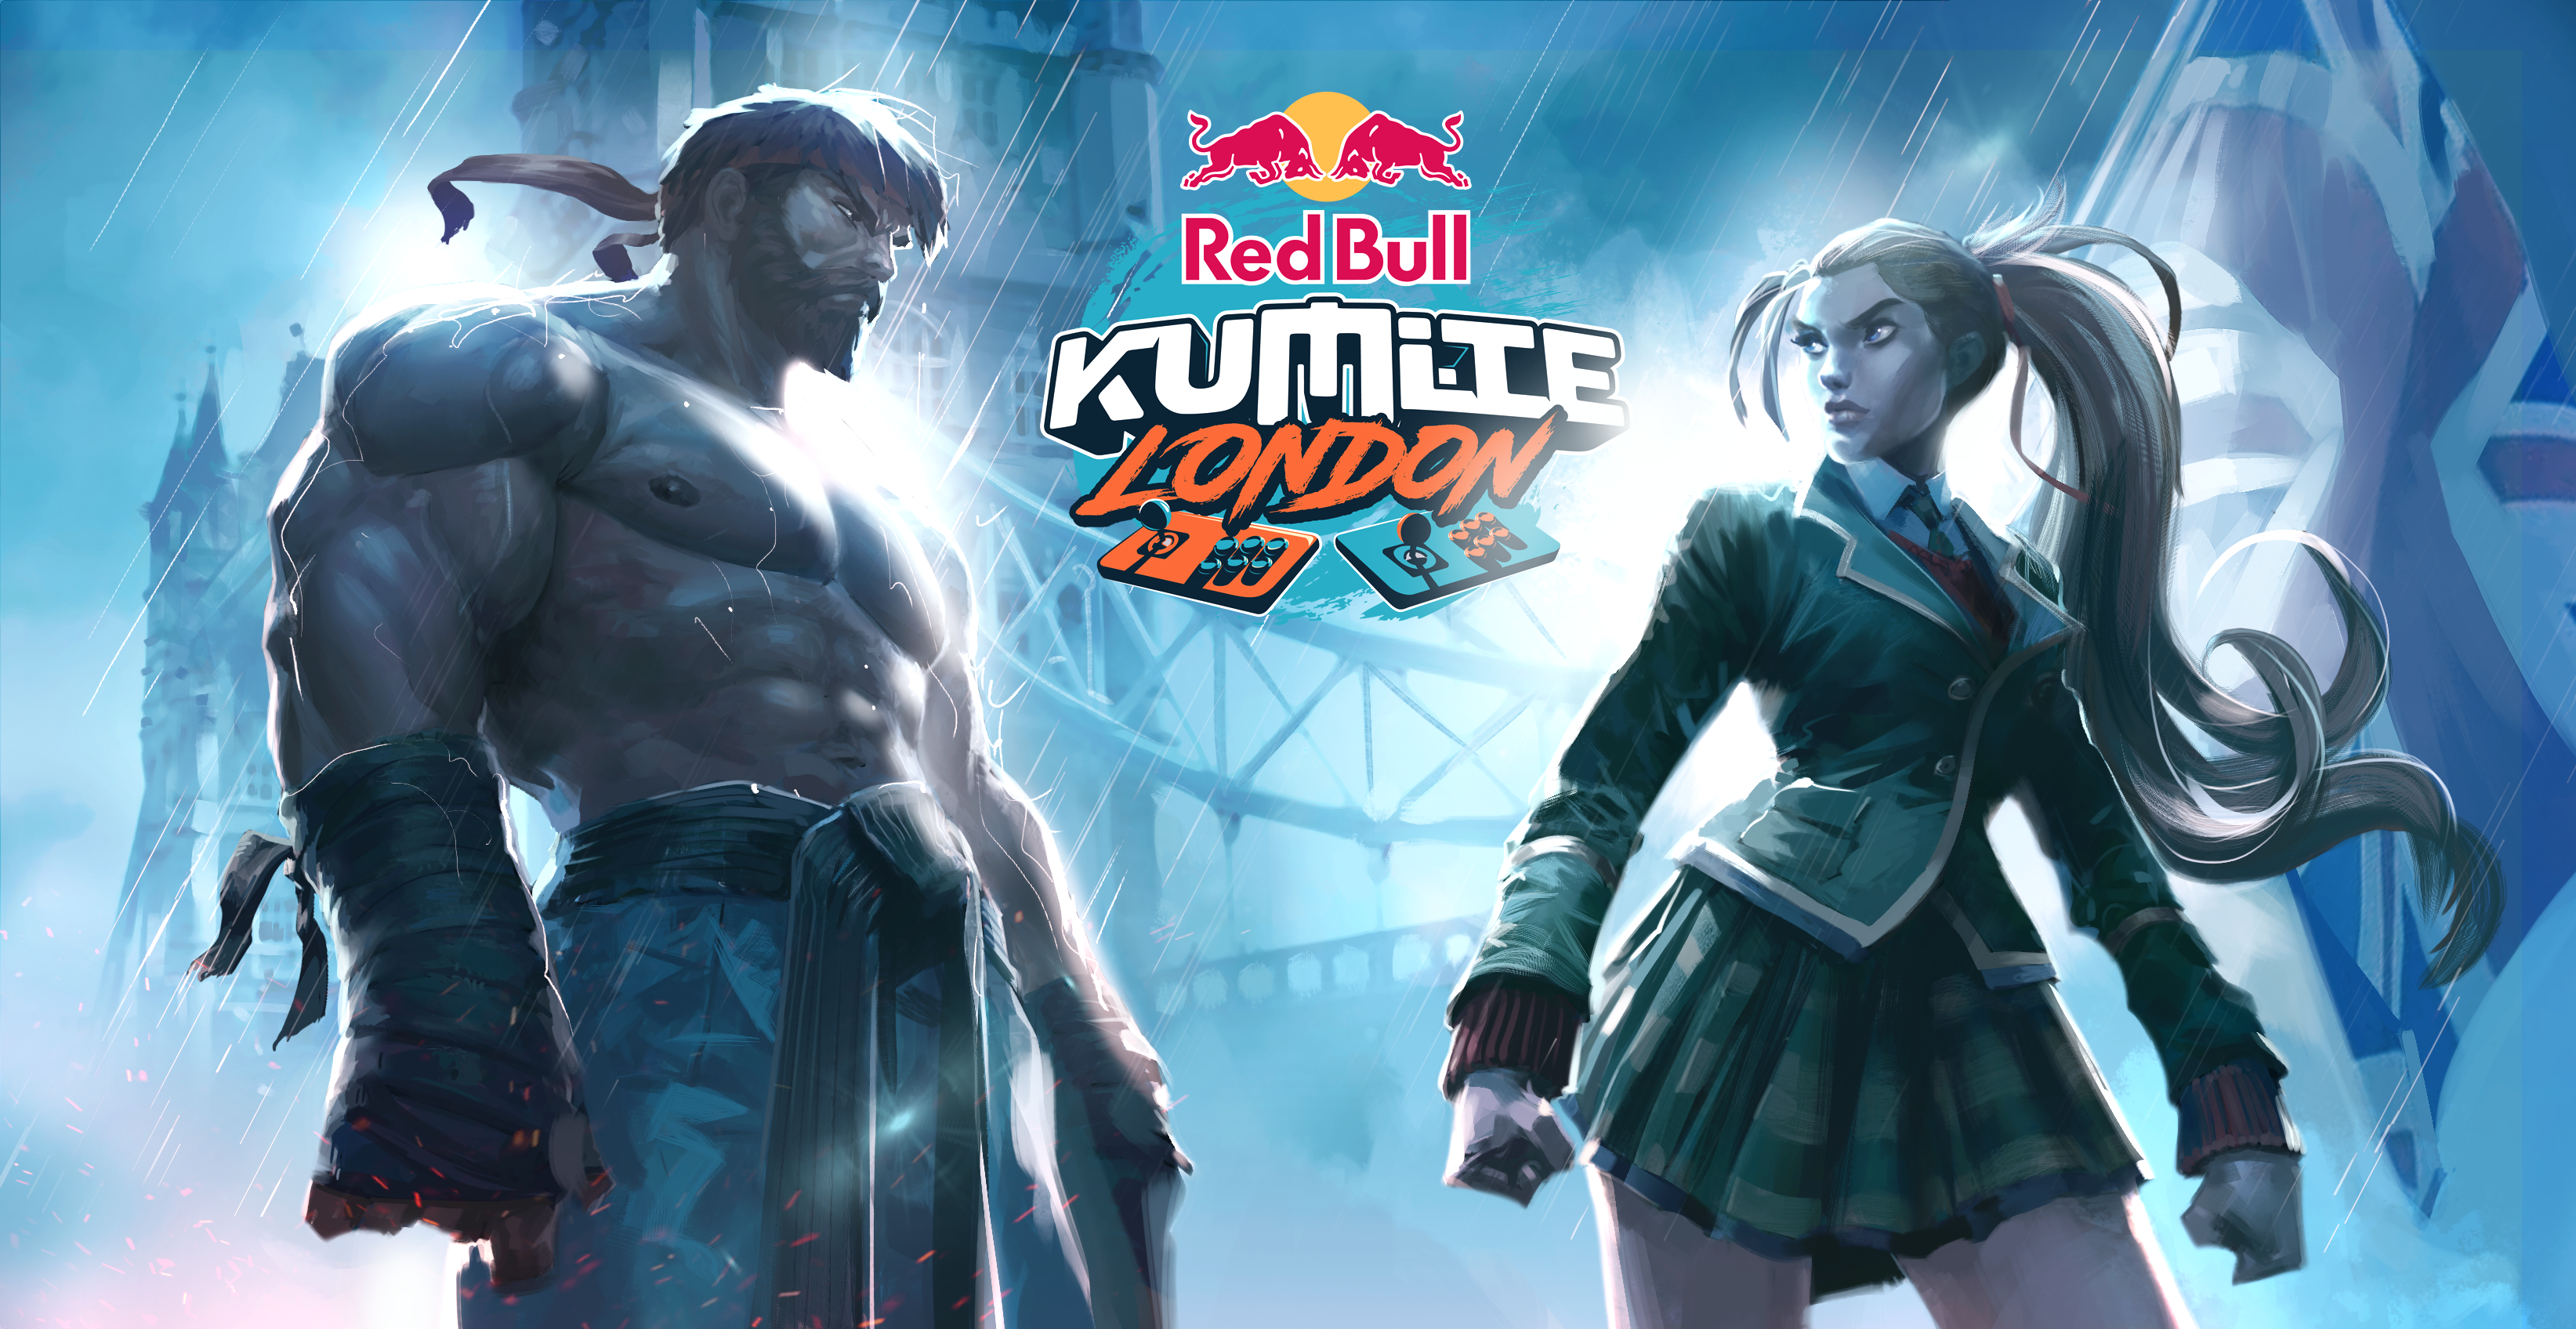 The Latest about Red Bull Kumite London